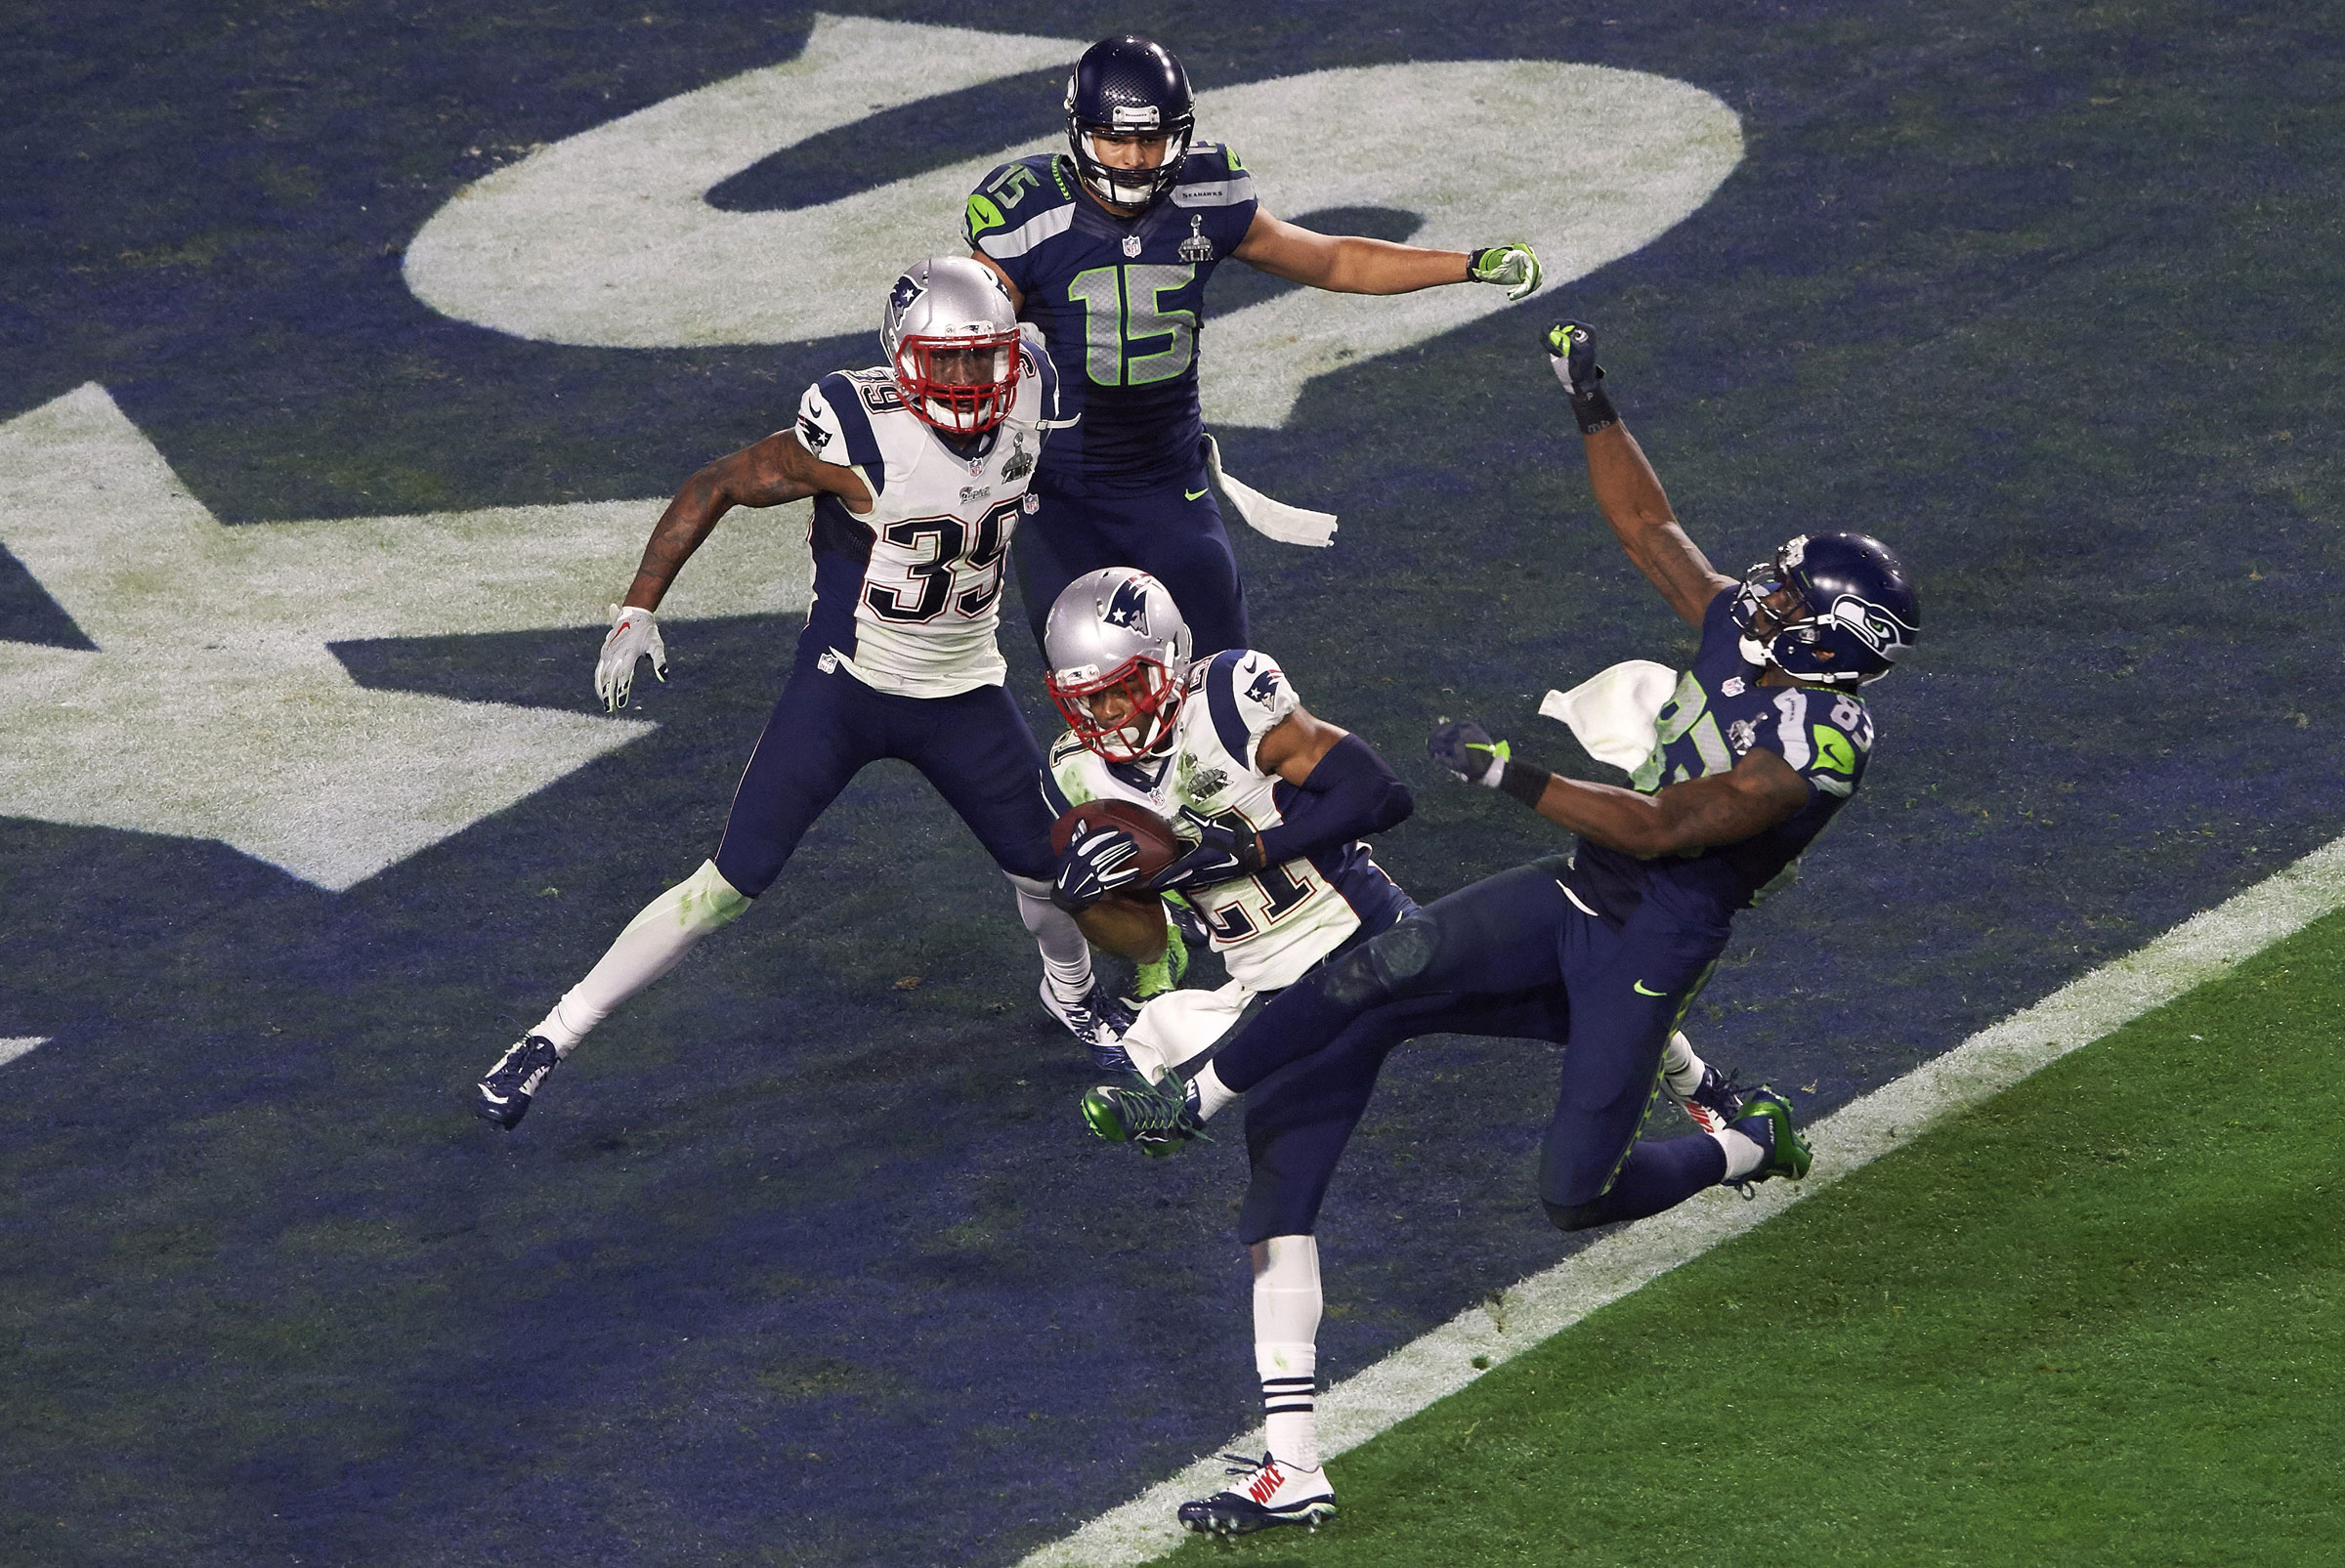 New England Patriots Malcolm Butler intercepts the ball on the goal-line during the final fourth quarter drive against the Seattle Seahawks in Super Bowl XLIX, on Feb. 1, 2015.